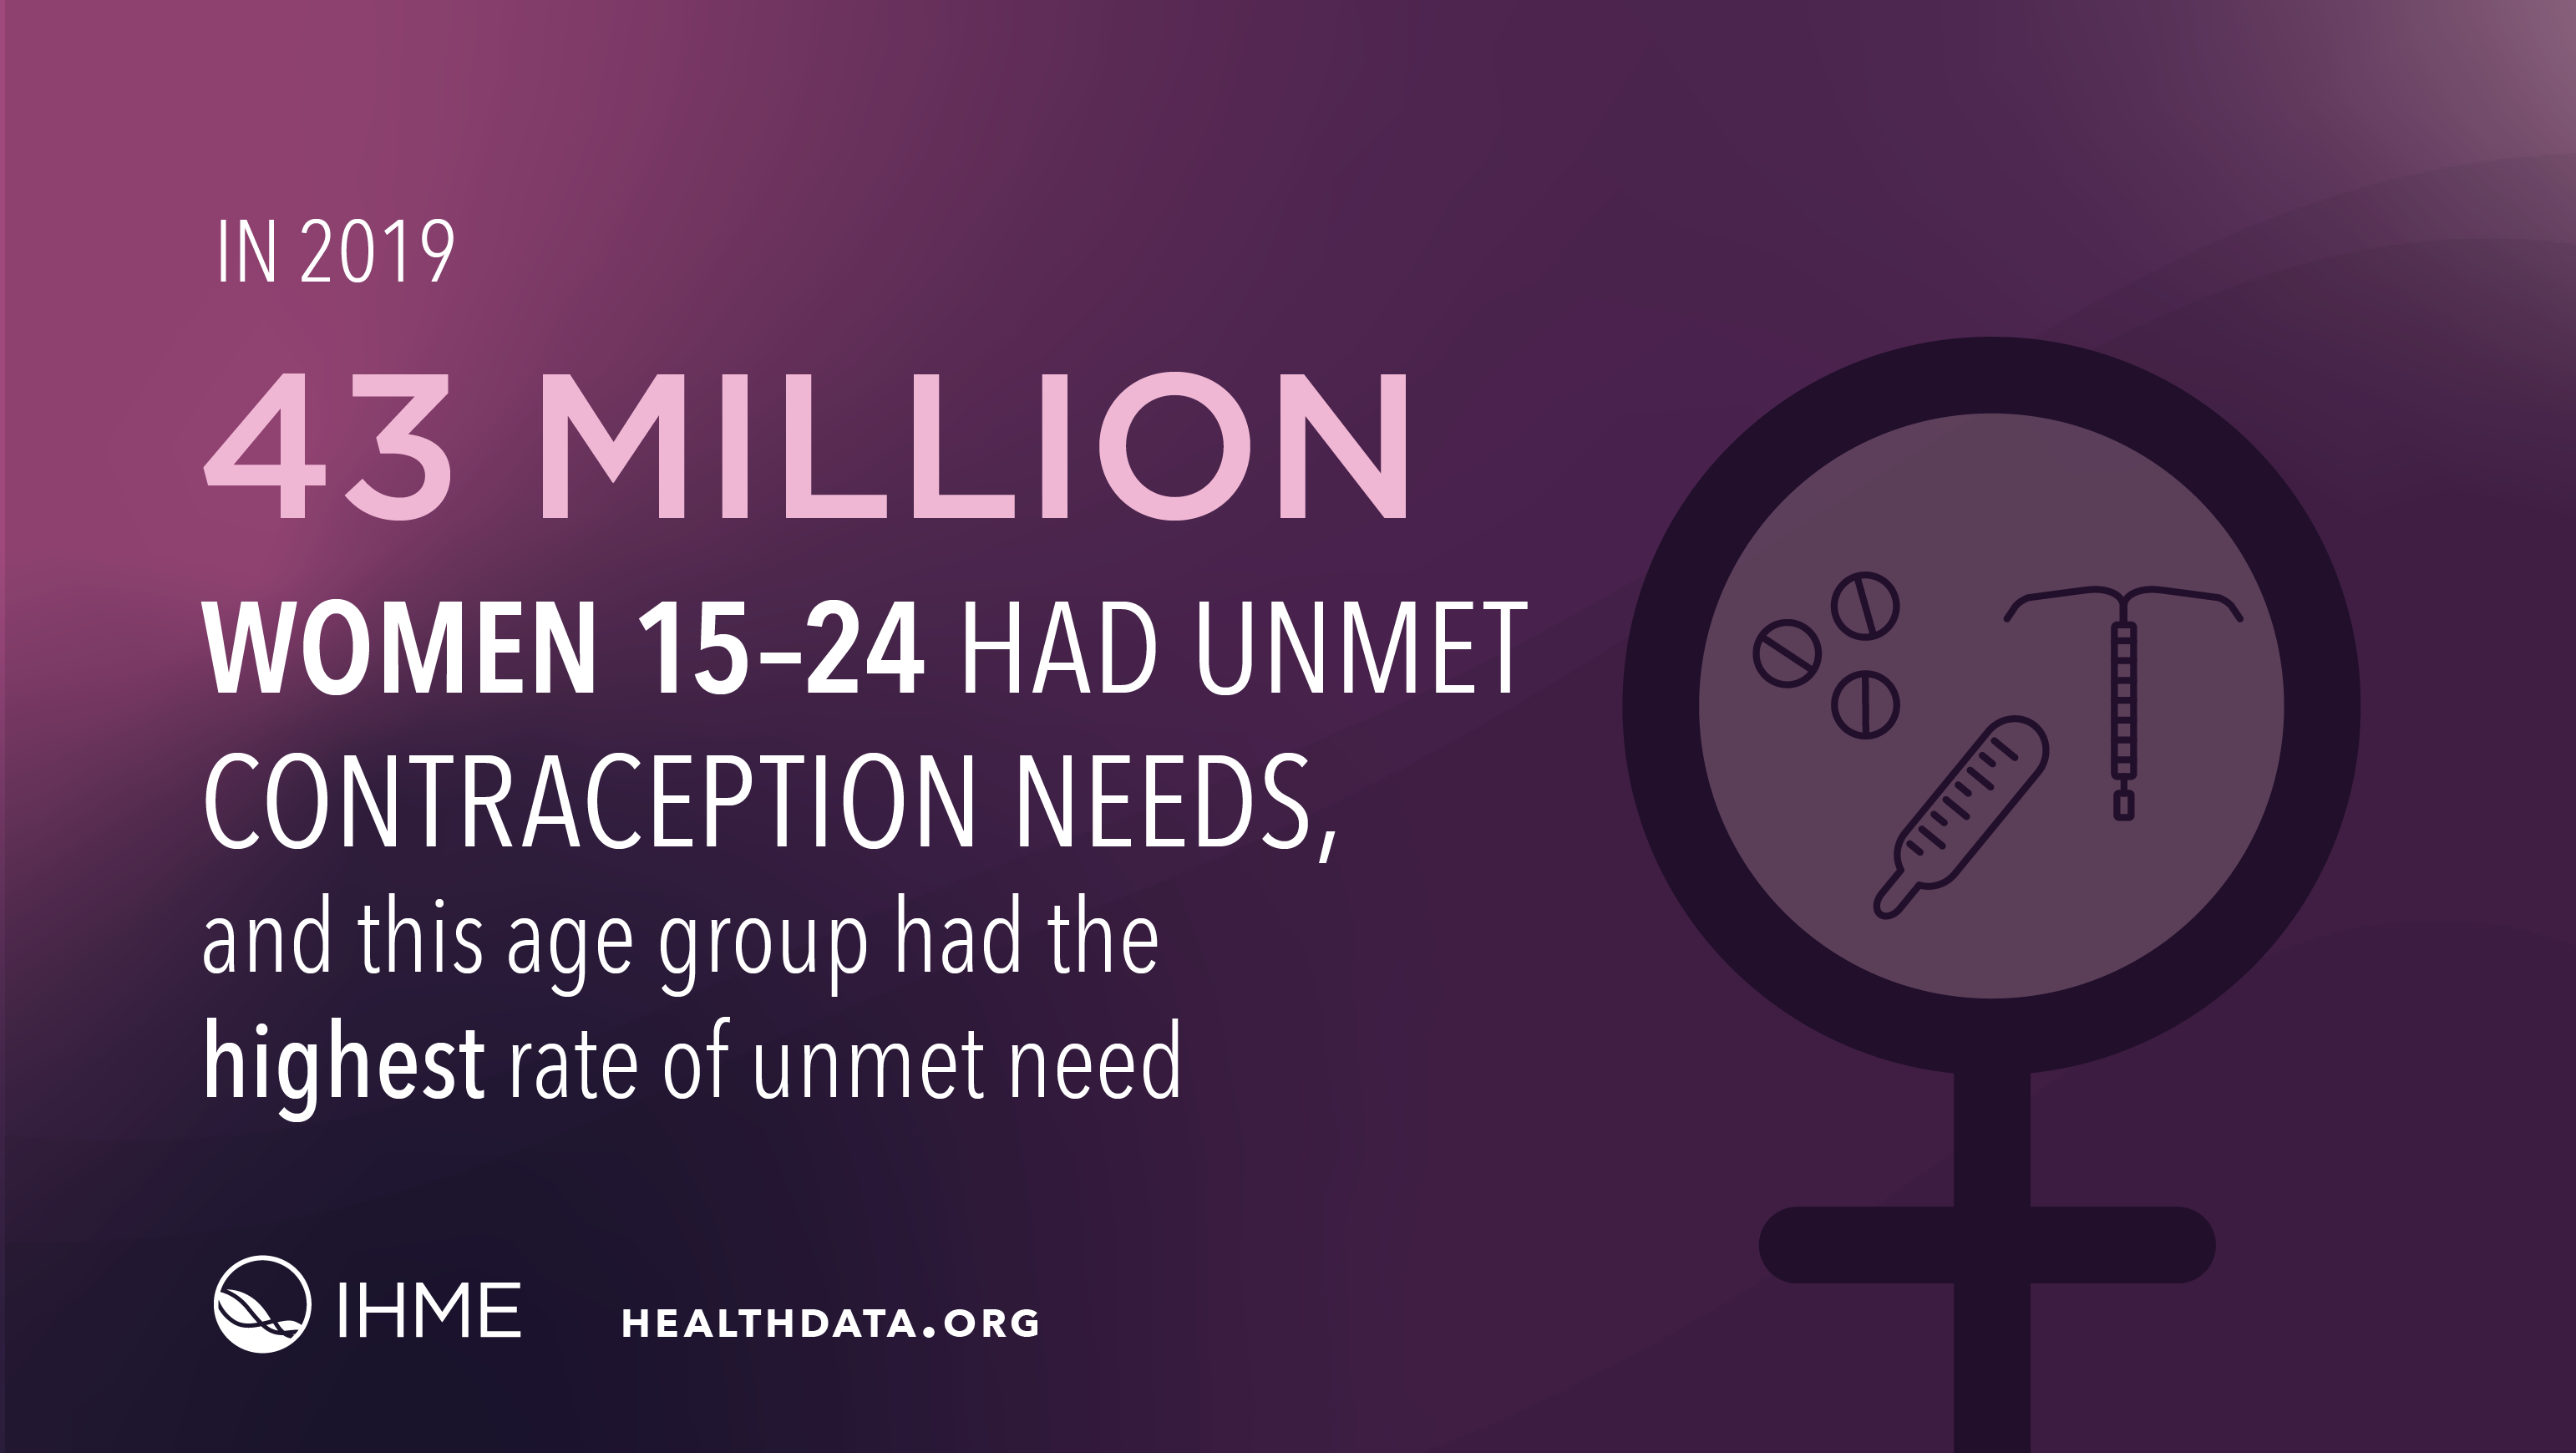 https://www.healthdata.org/sites/default/files/files/images/news_release/2022/GBD_2019_Contraception_3G_2022.07.21_Share.png